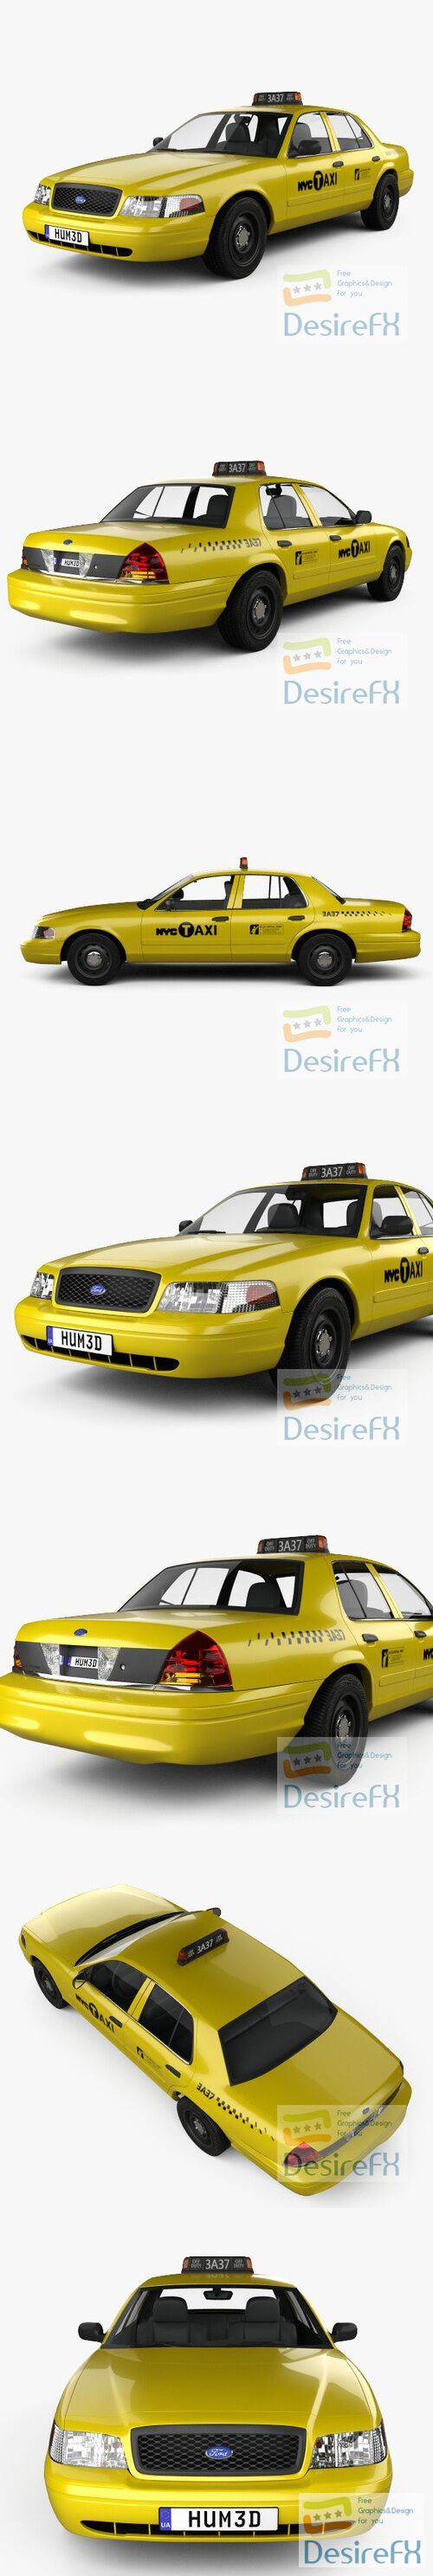 Ford Crown Victoria New York Taxi 2005 3D Model